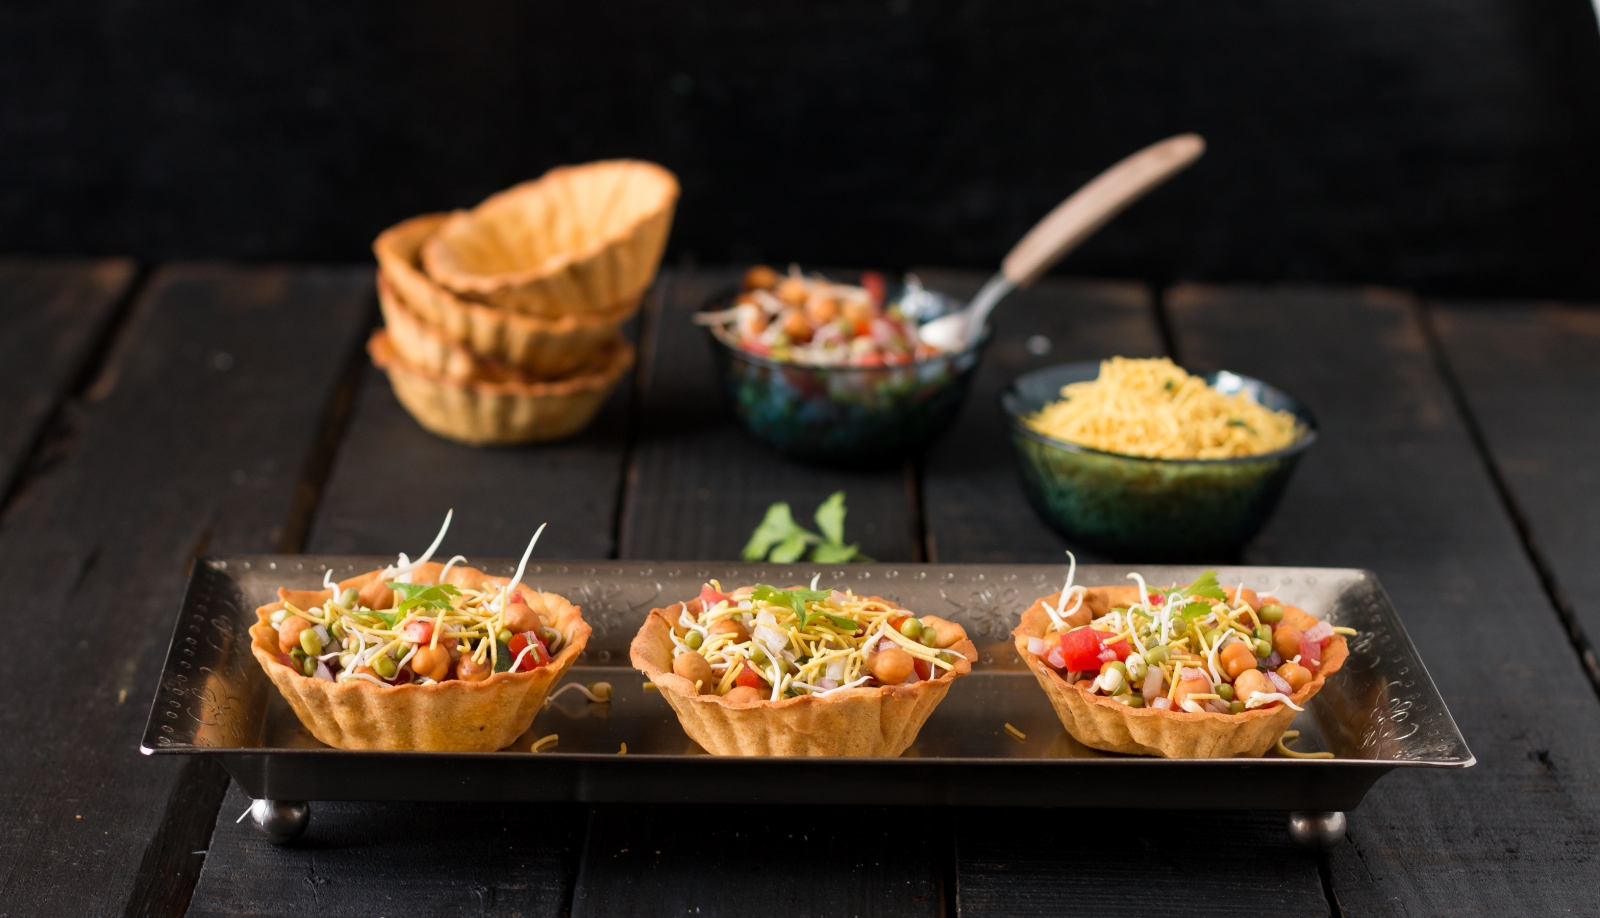 Homemade Canape Papdi Chaat Recipe